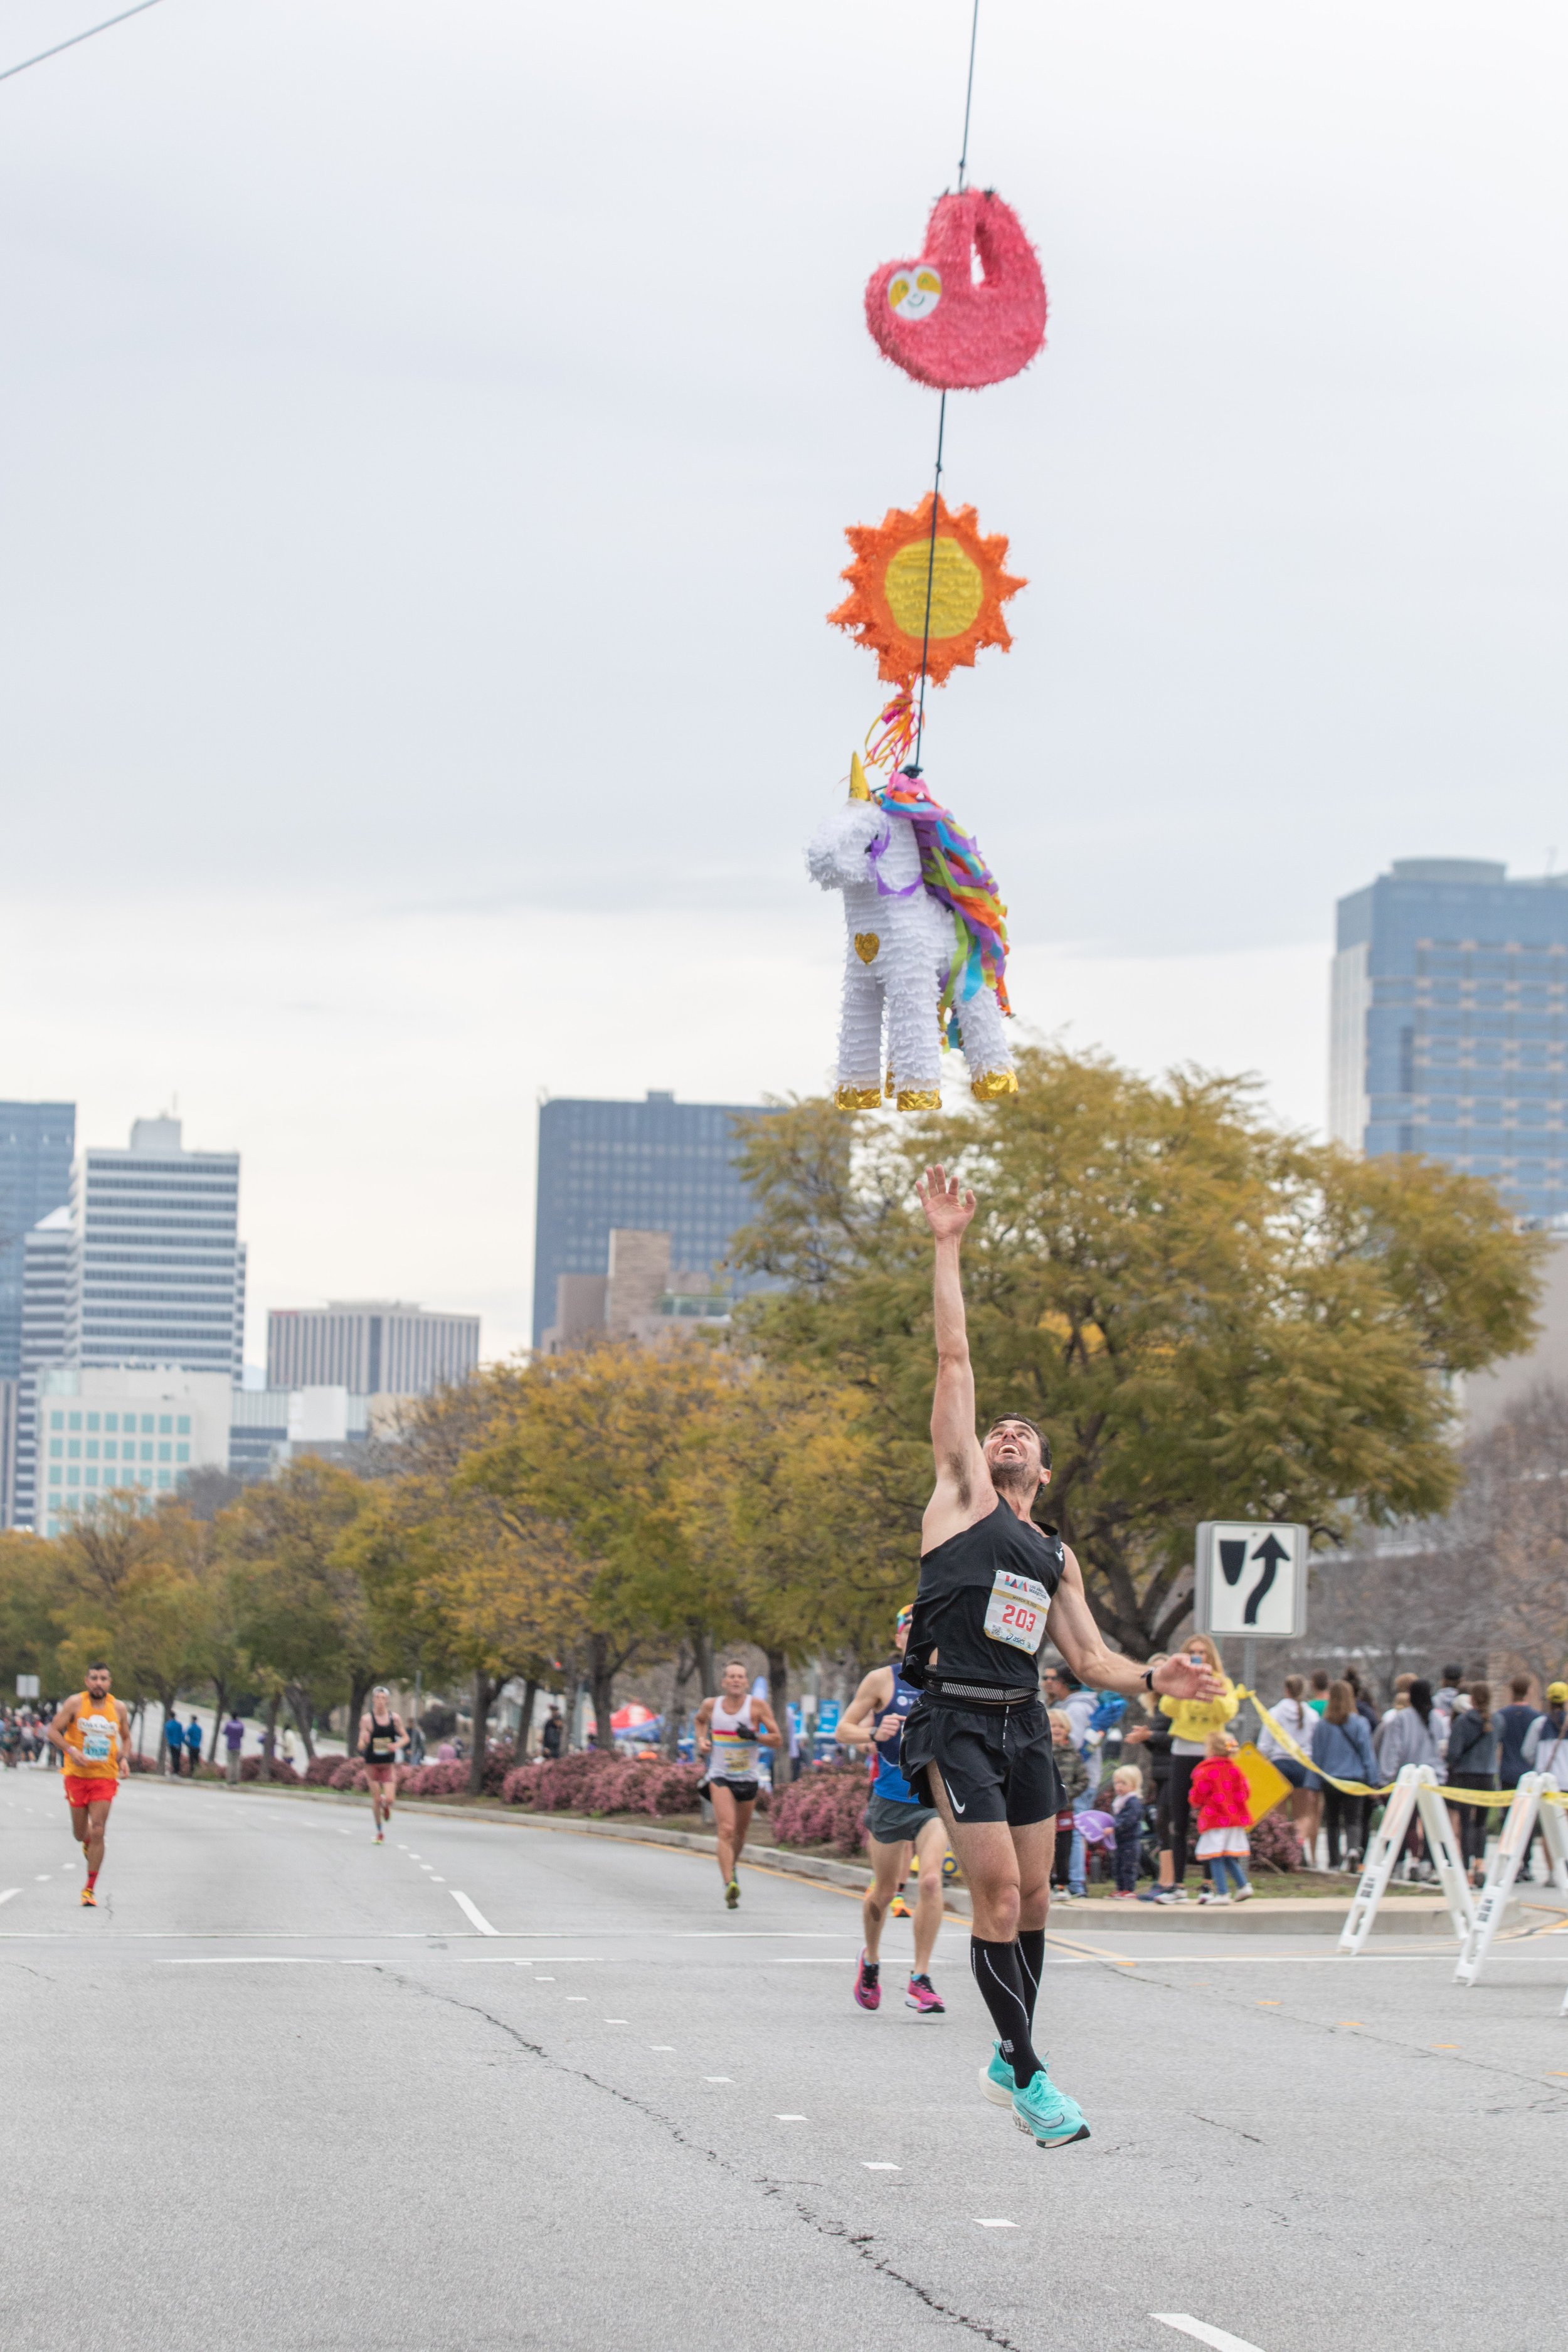  Shant Hagopian from Glendale, California jumps to touch the piñata at mile 19. Hagopian finished 38th place overall on Sunday, March 19, 2023. Los Angeles, Calif. (Jorge Devotto | The Corsair) 